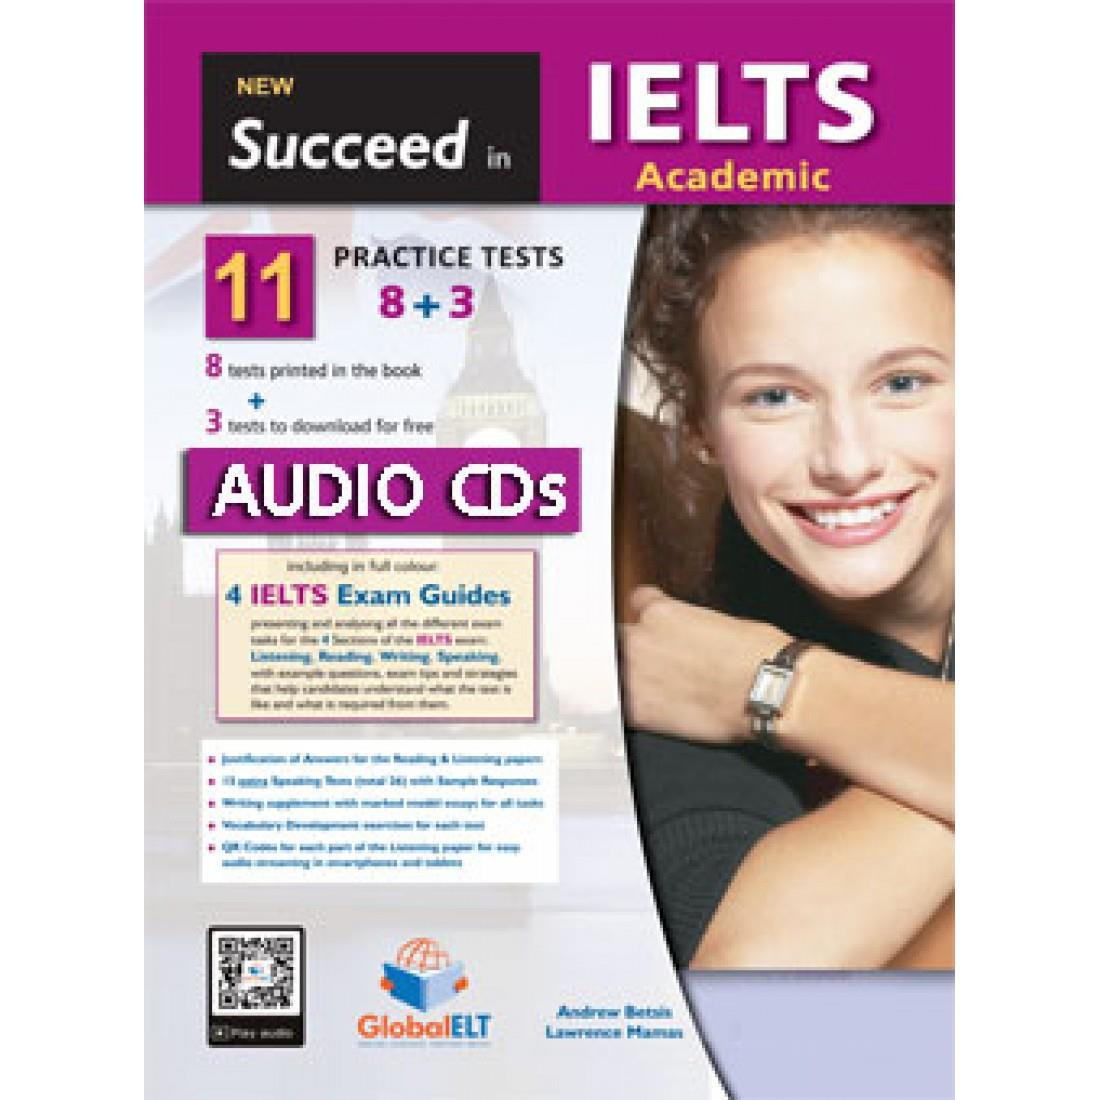 NEW SUCCEED IN IELTS ACADEMIC 11(8+3) PRACTICE TESTS CD CLASS